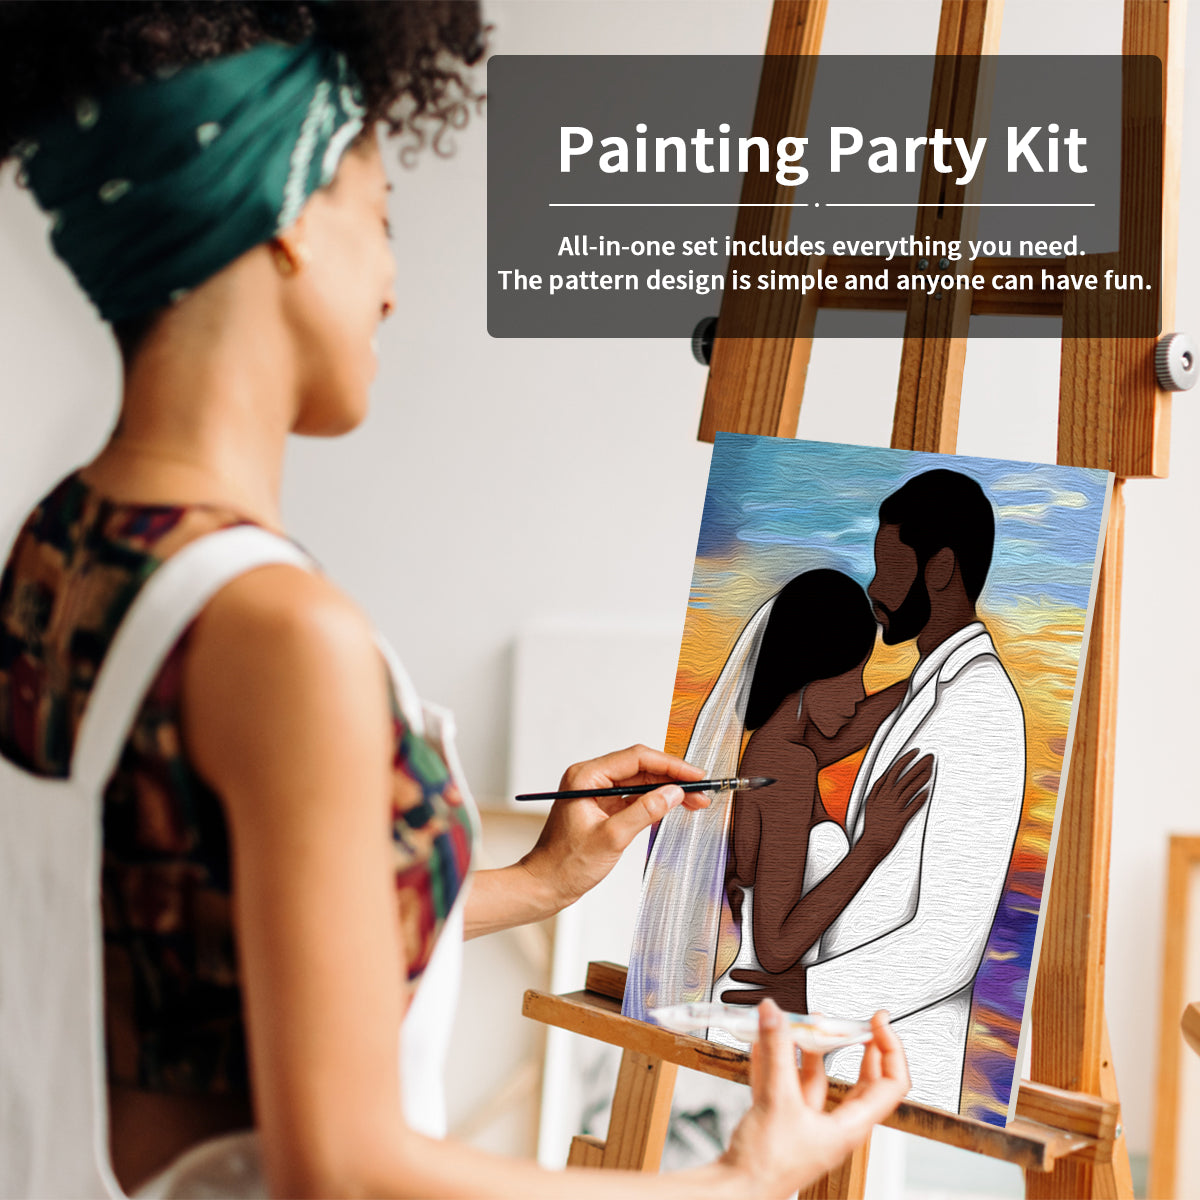 VOCHIC Canvas Painting Kit Couples Paint Party Kits Pre Drawn Canvas for  Adults for Paint and Sip Date Night Games for Couples Painting kit 8x10 (2